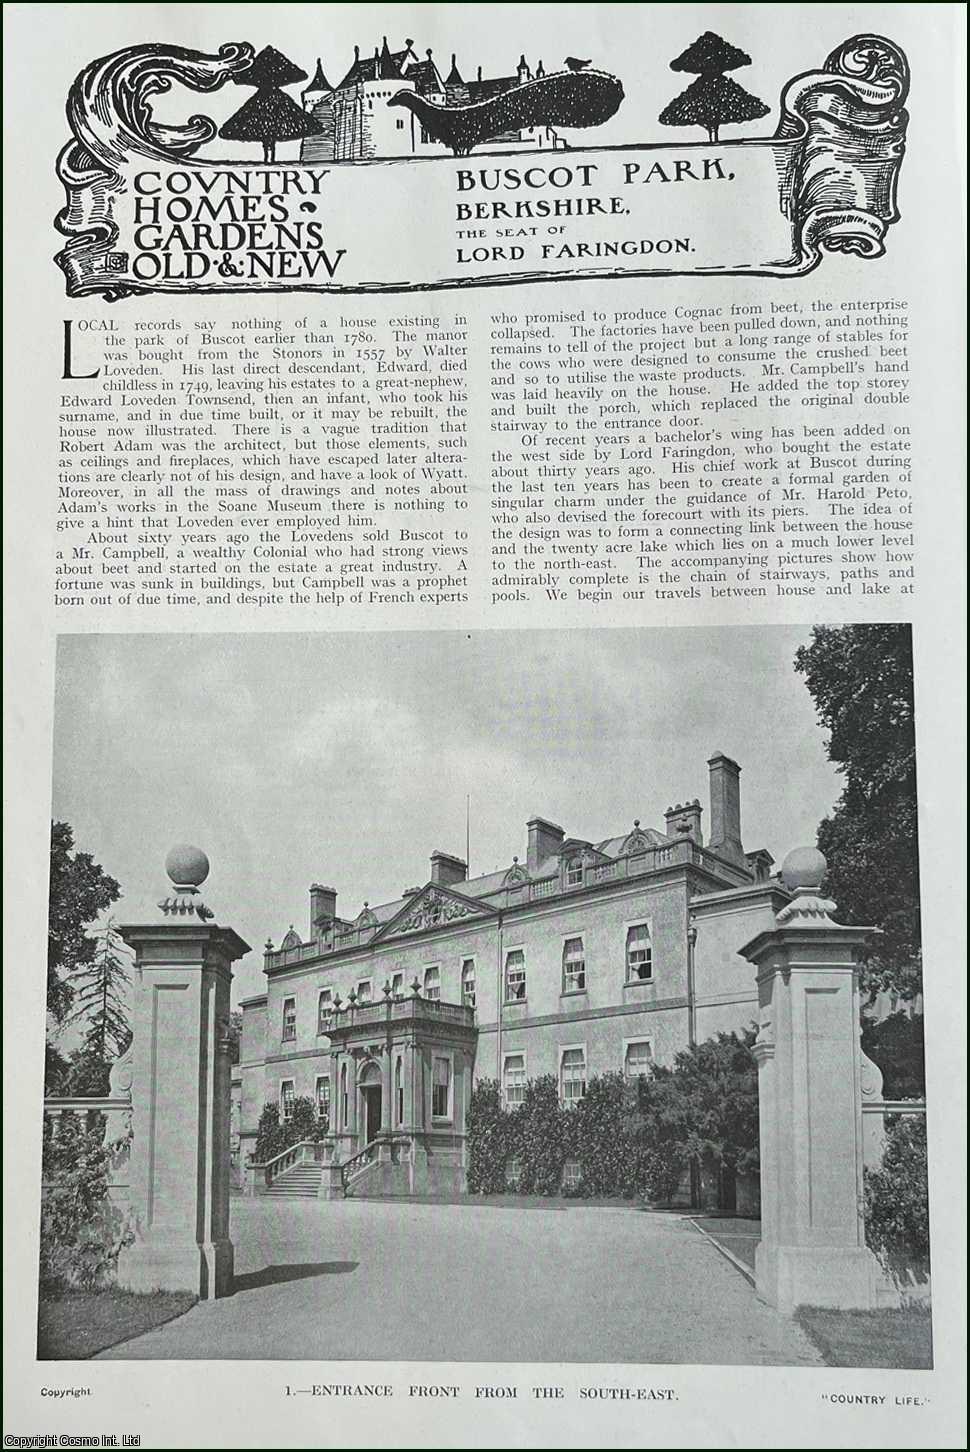 Country Life Magazine - Buscot Park, Berkshire. Several pictures and accompanying text, removed from an original issue of Country Life Magazine, 1916.